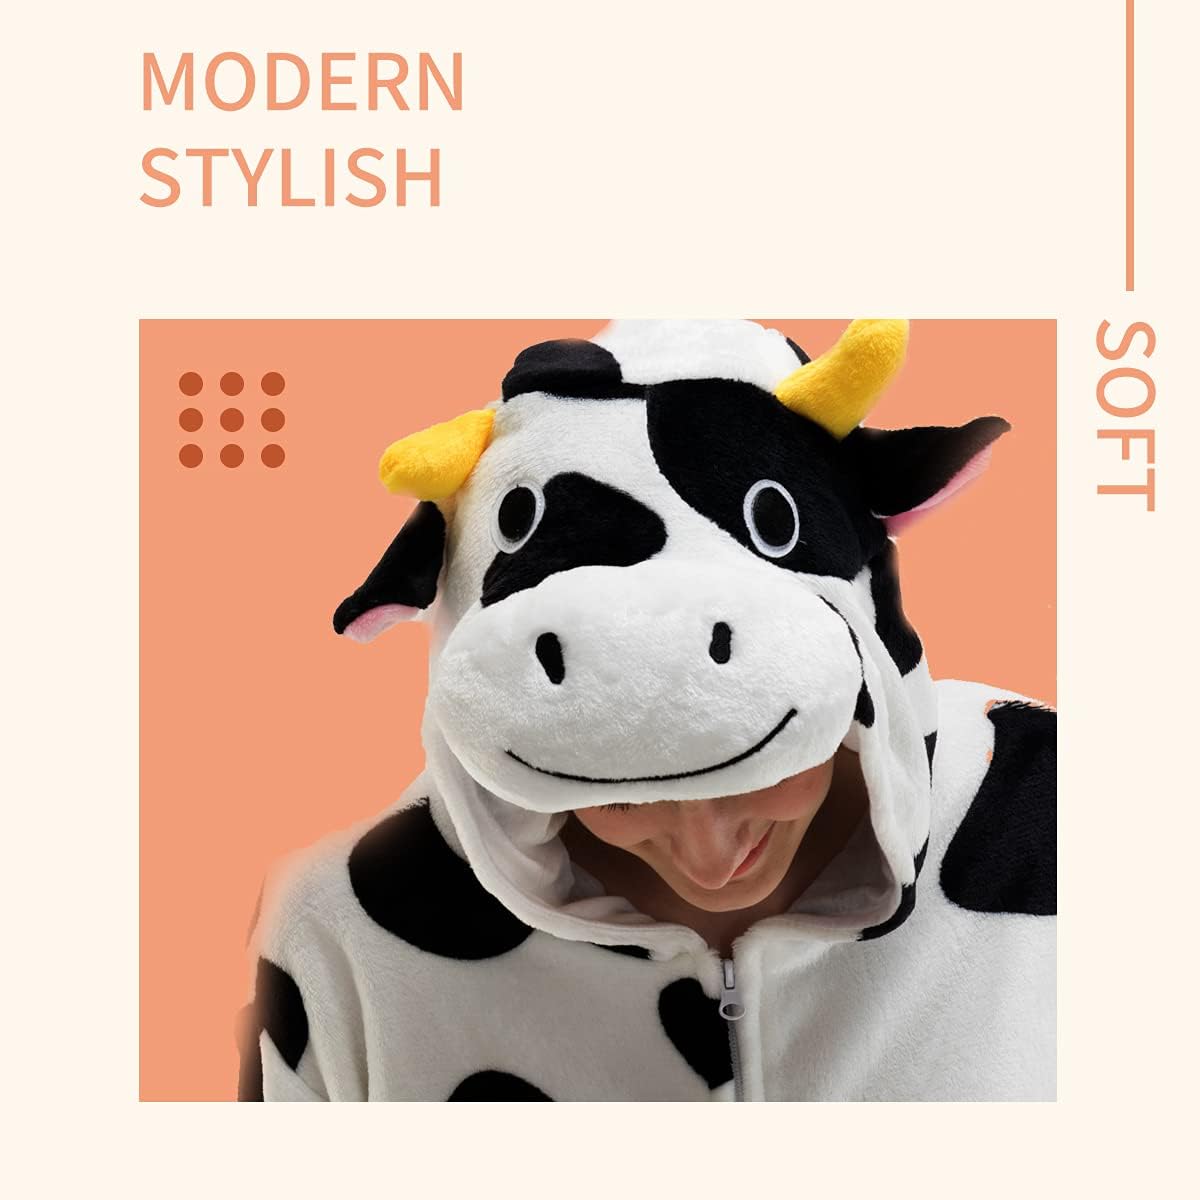 Unisex Babies Cow Cosplay Animal Onesie Pajamas Within 24 Months